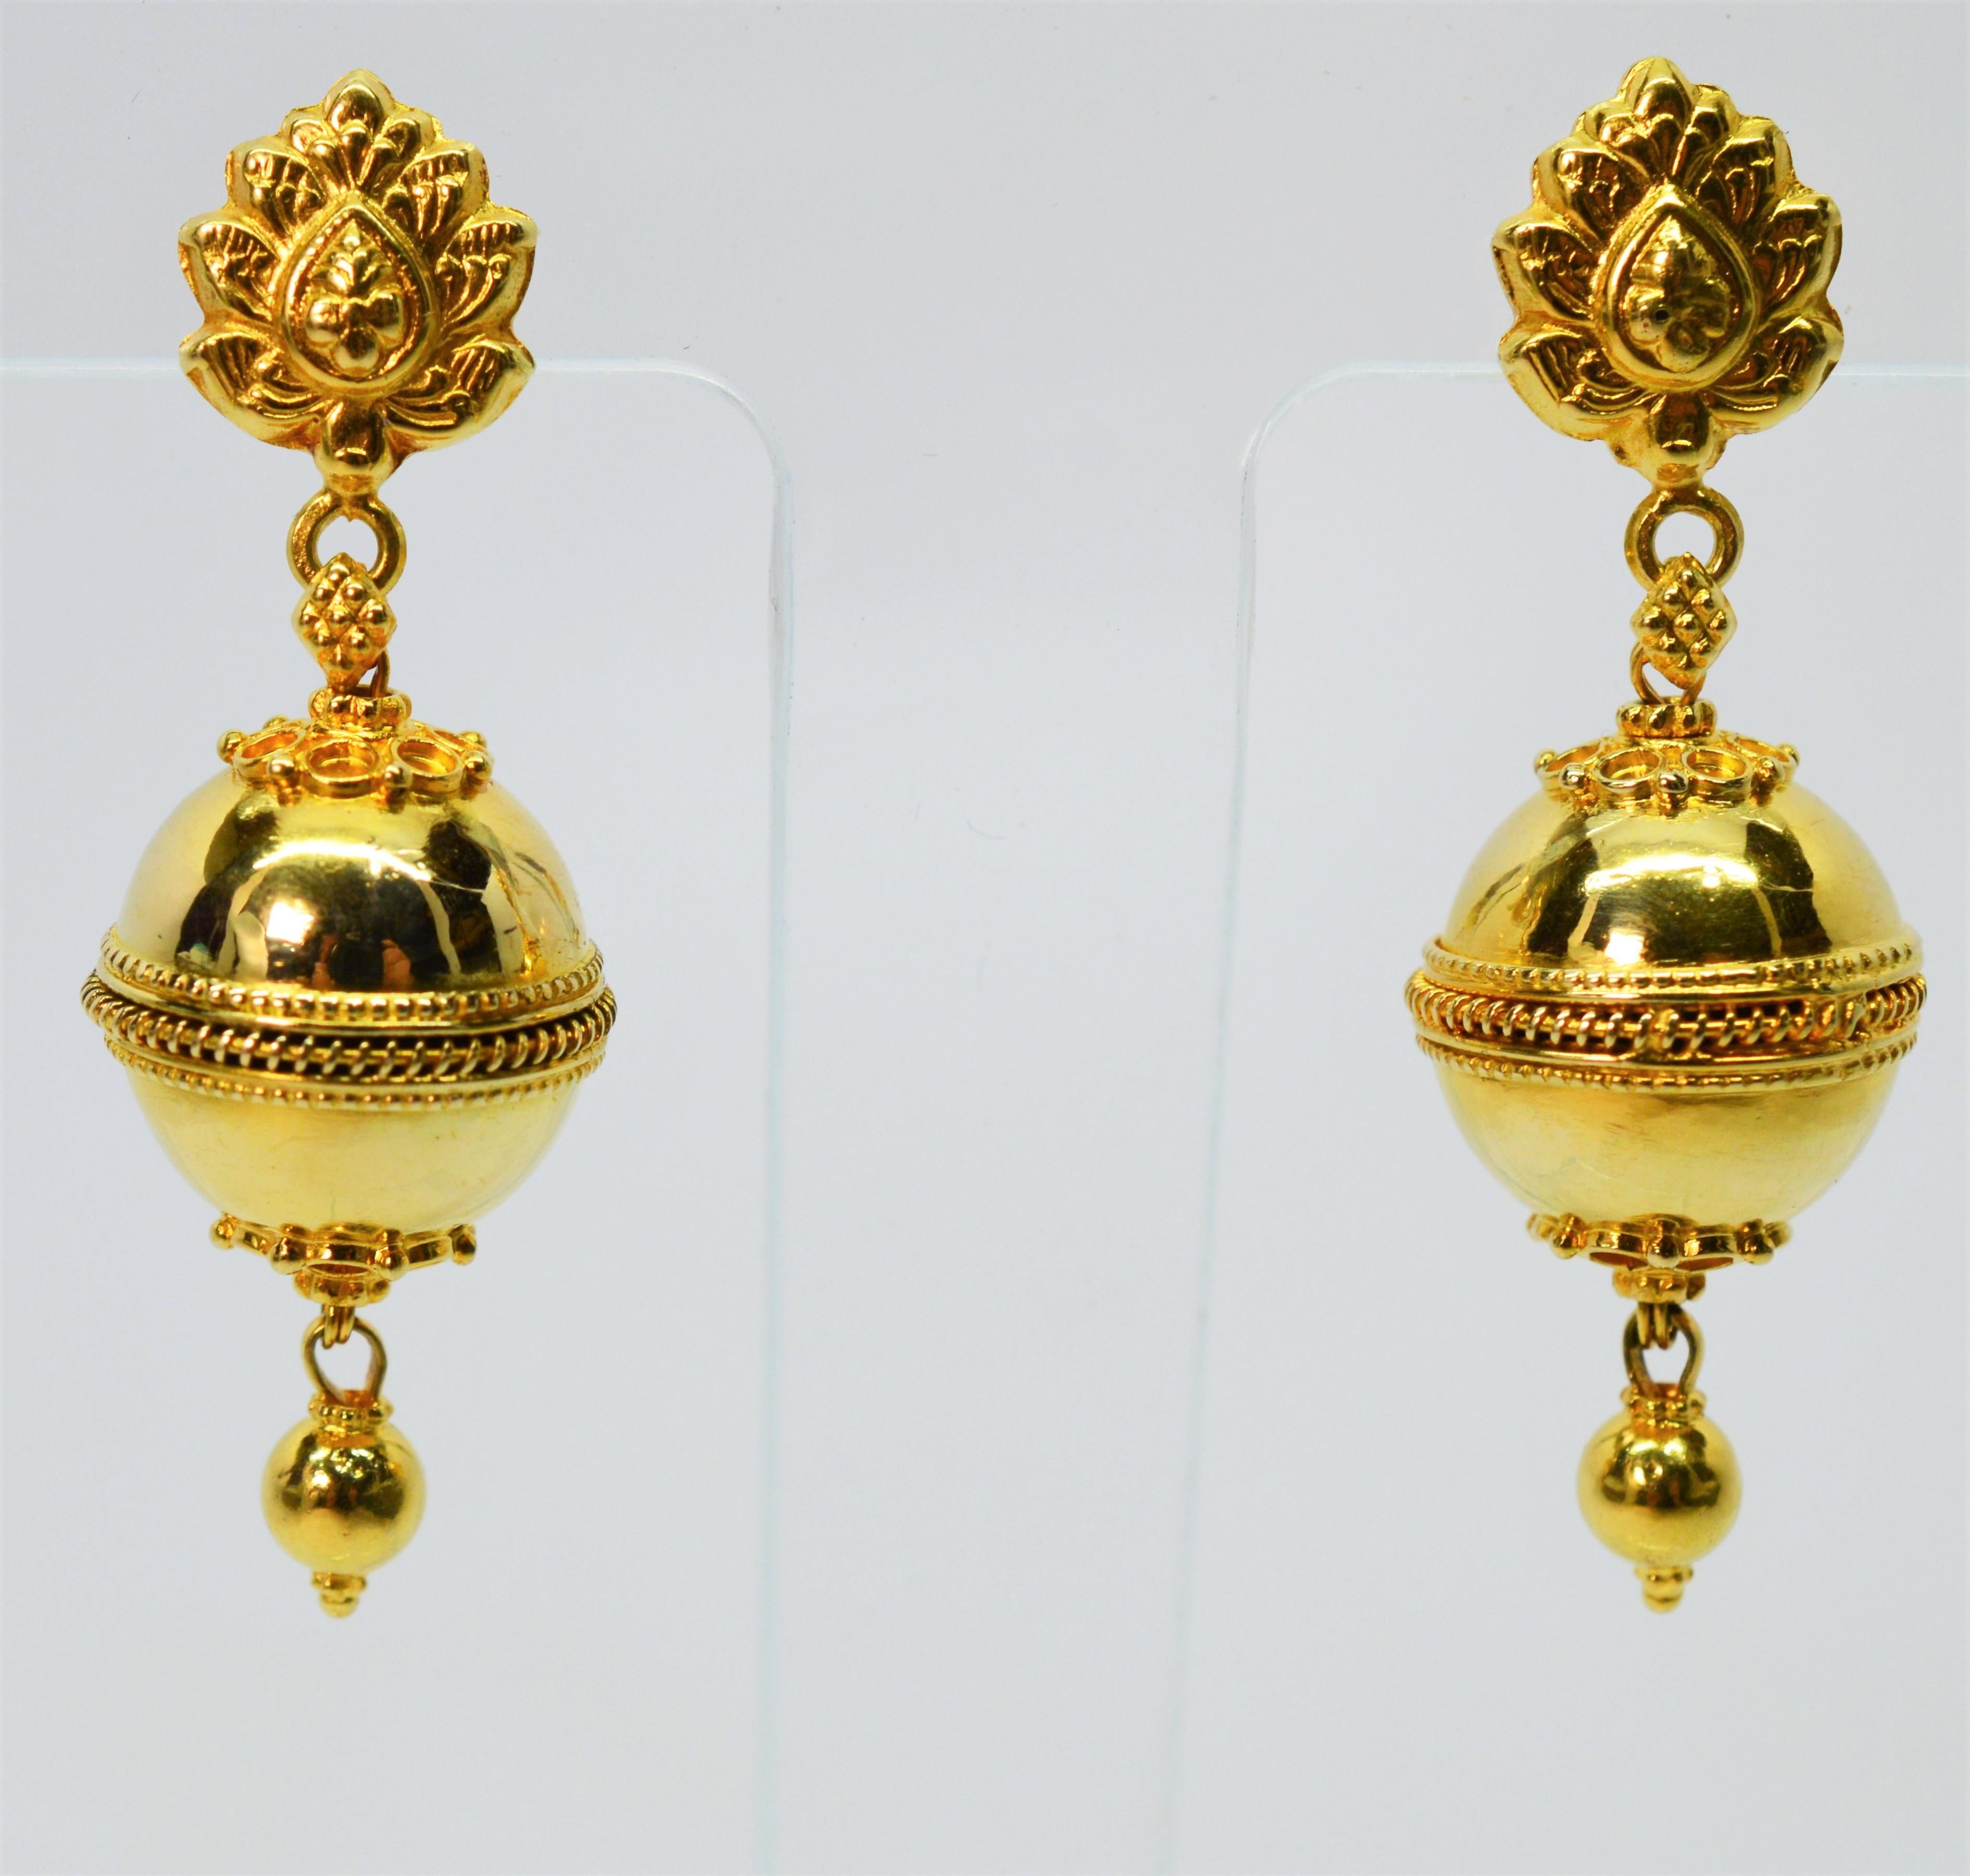 Yellow Gold Regal Ball Double Drop Earrings In Excellent Condition For Sale In Mount Kisco, NY